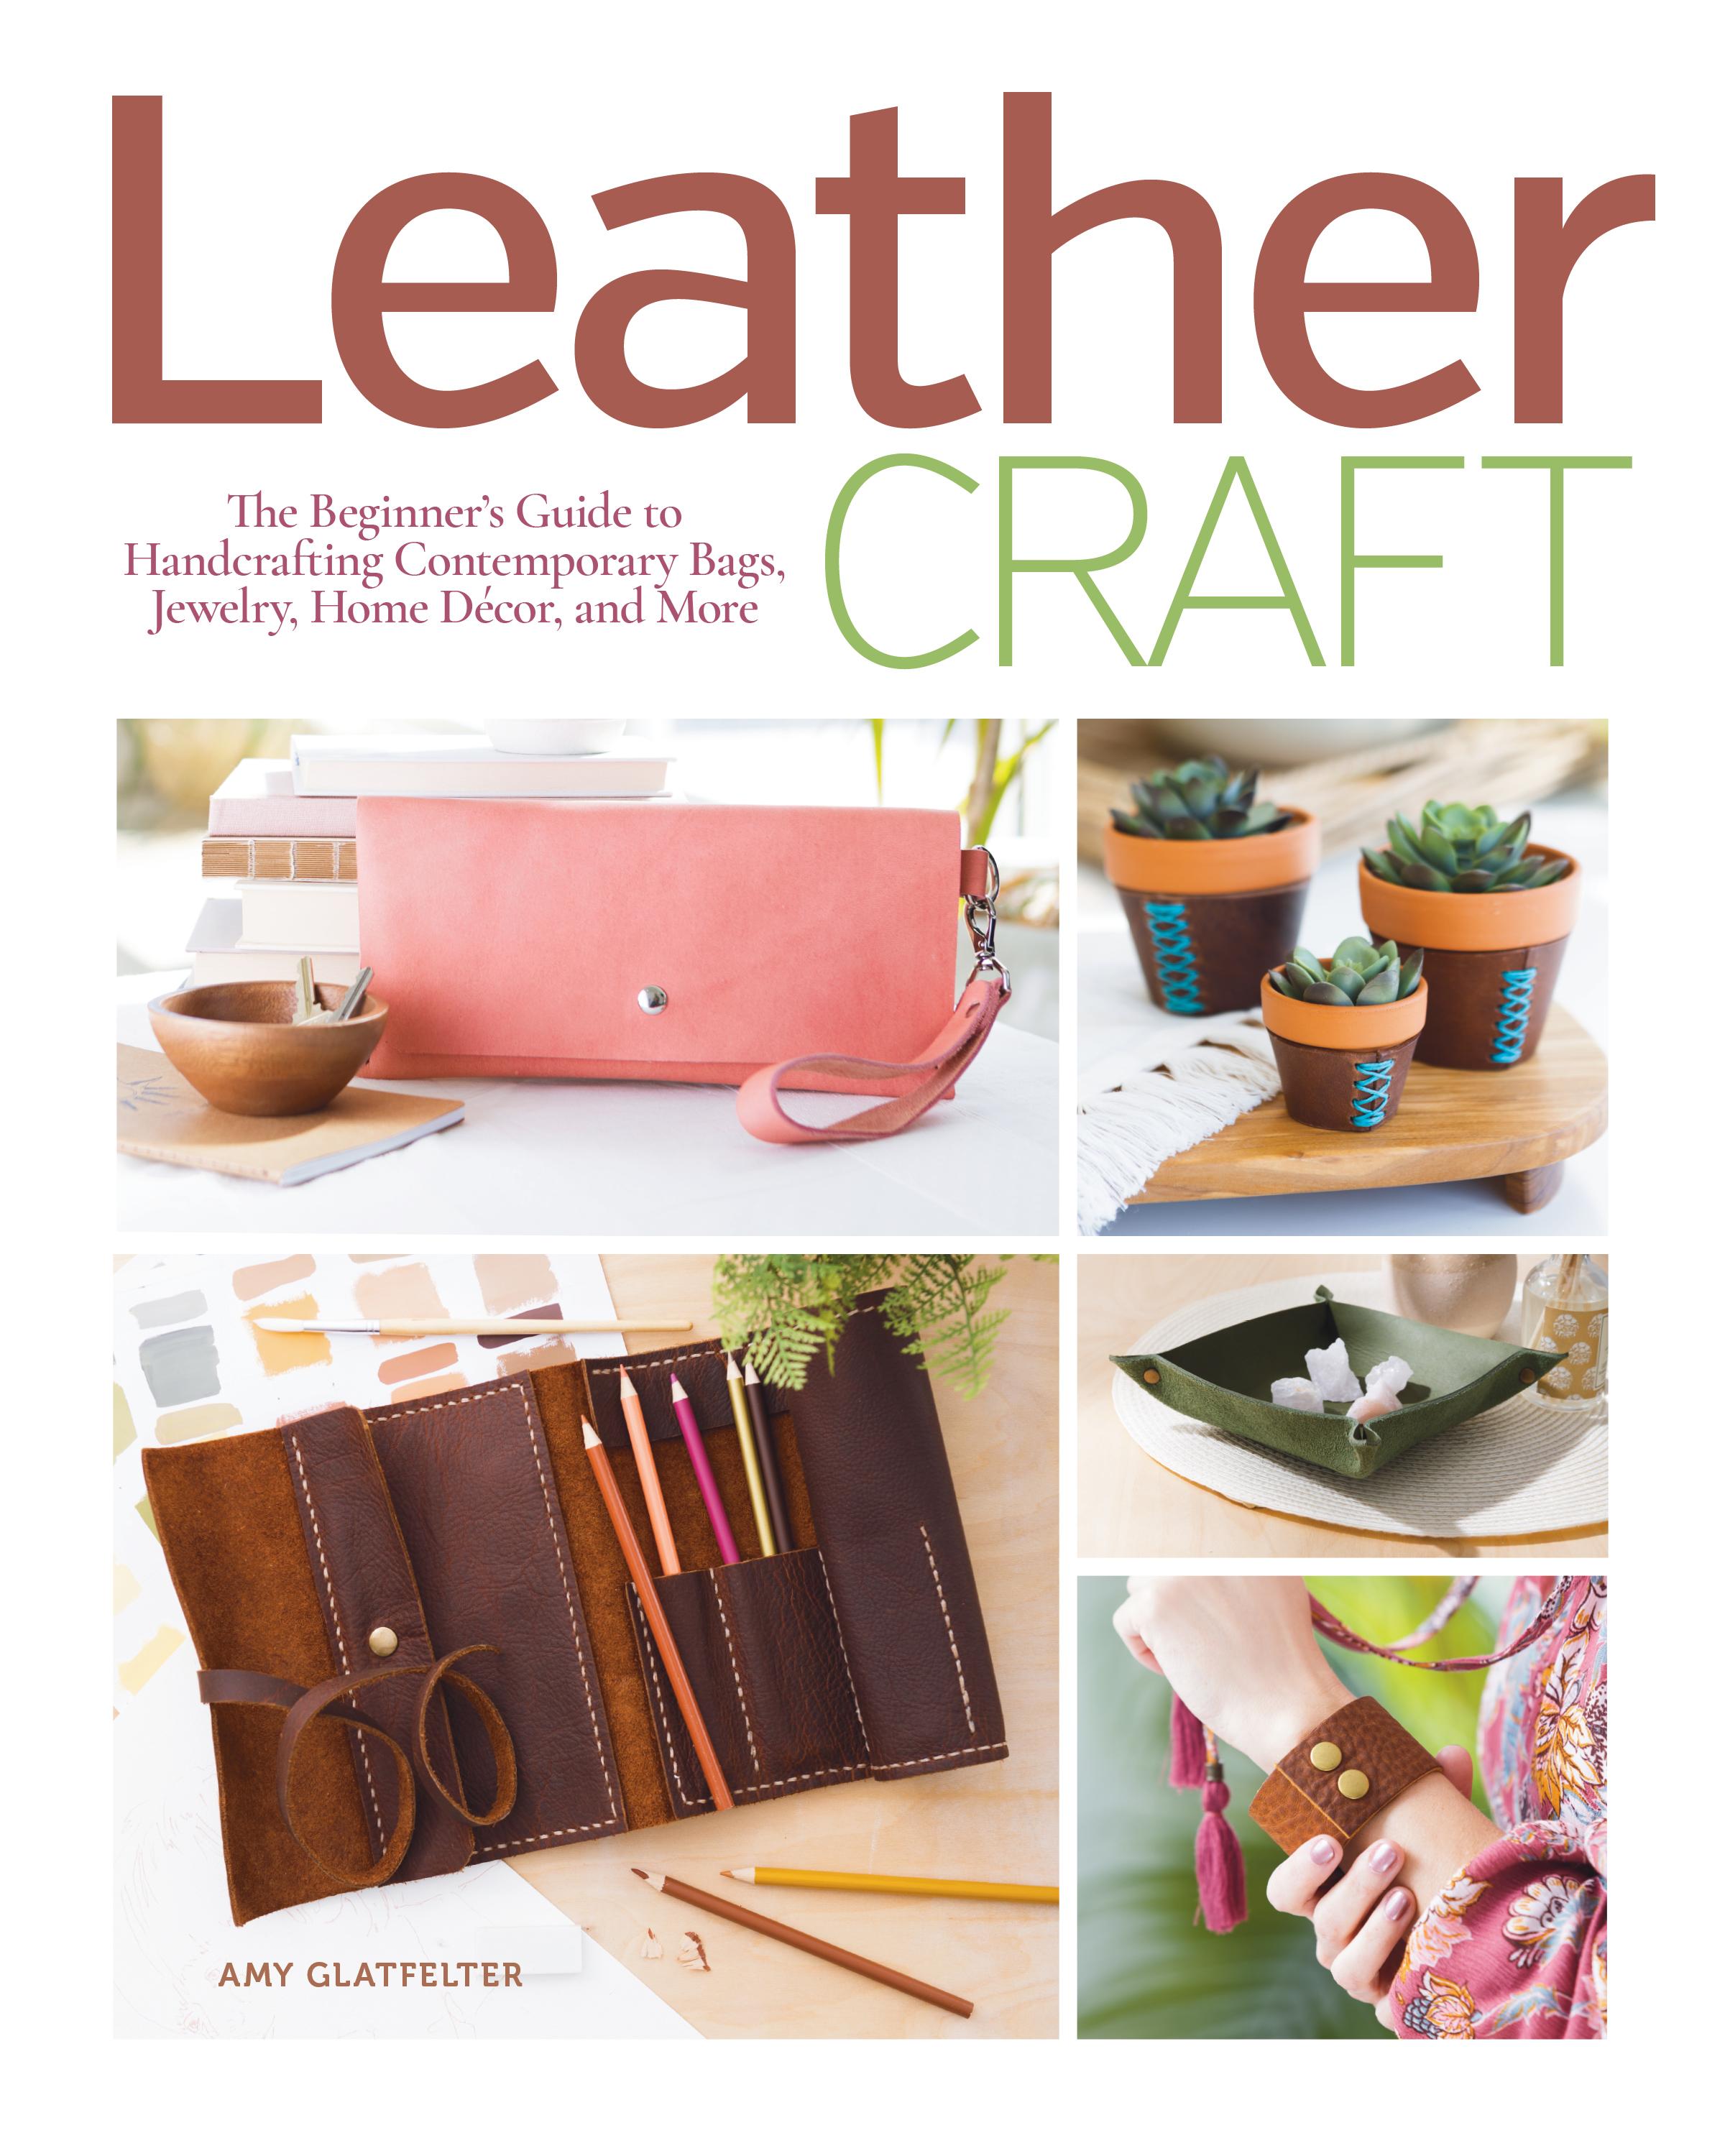 Woven Leather Bags: How to Craft and Weave Purses, Pouches, Wallets and More [Book]